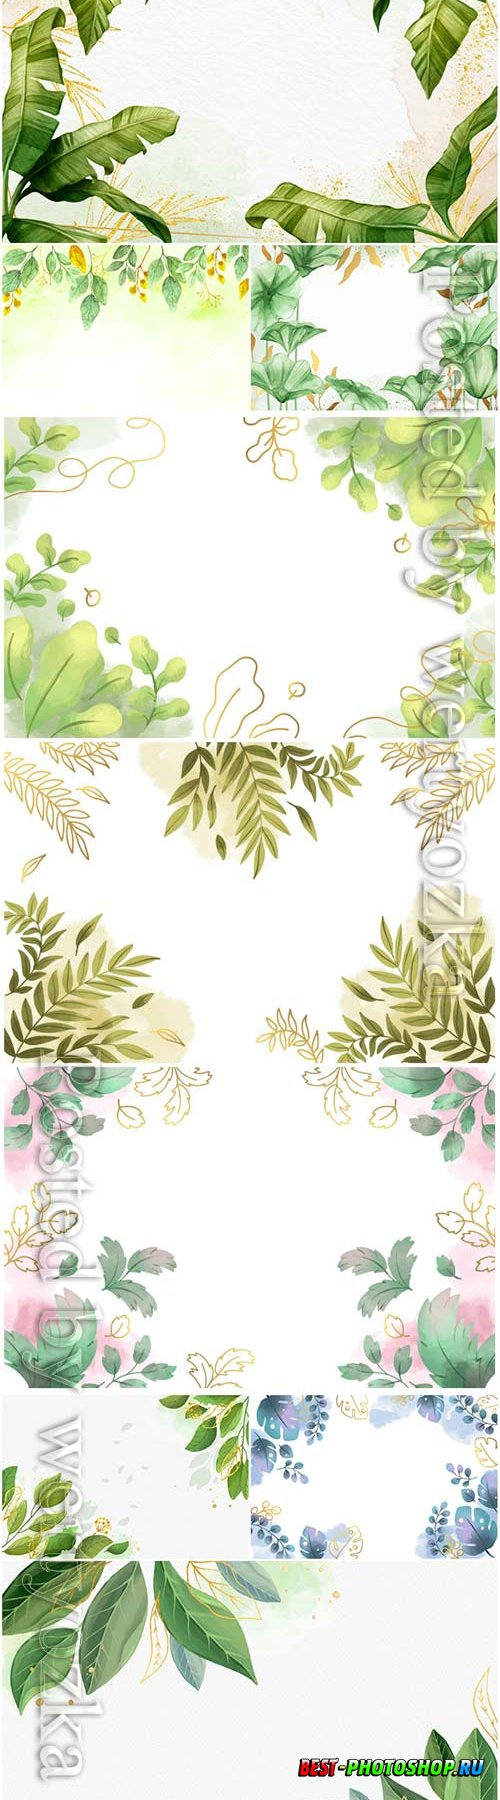 Nature background with golden foil